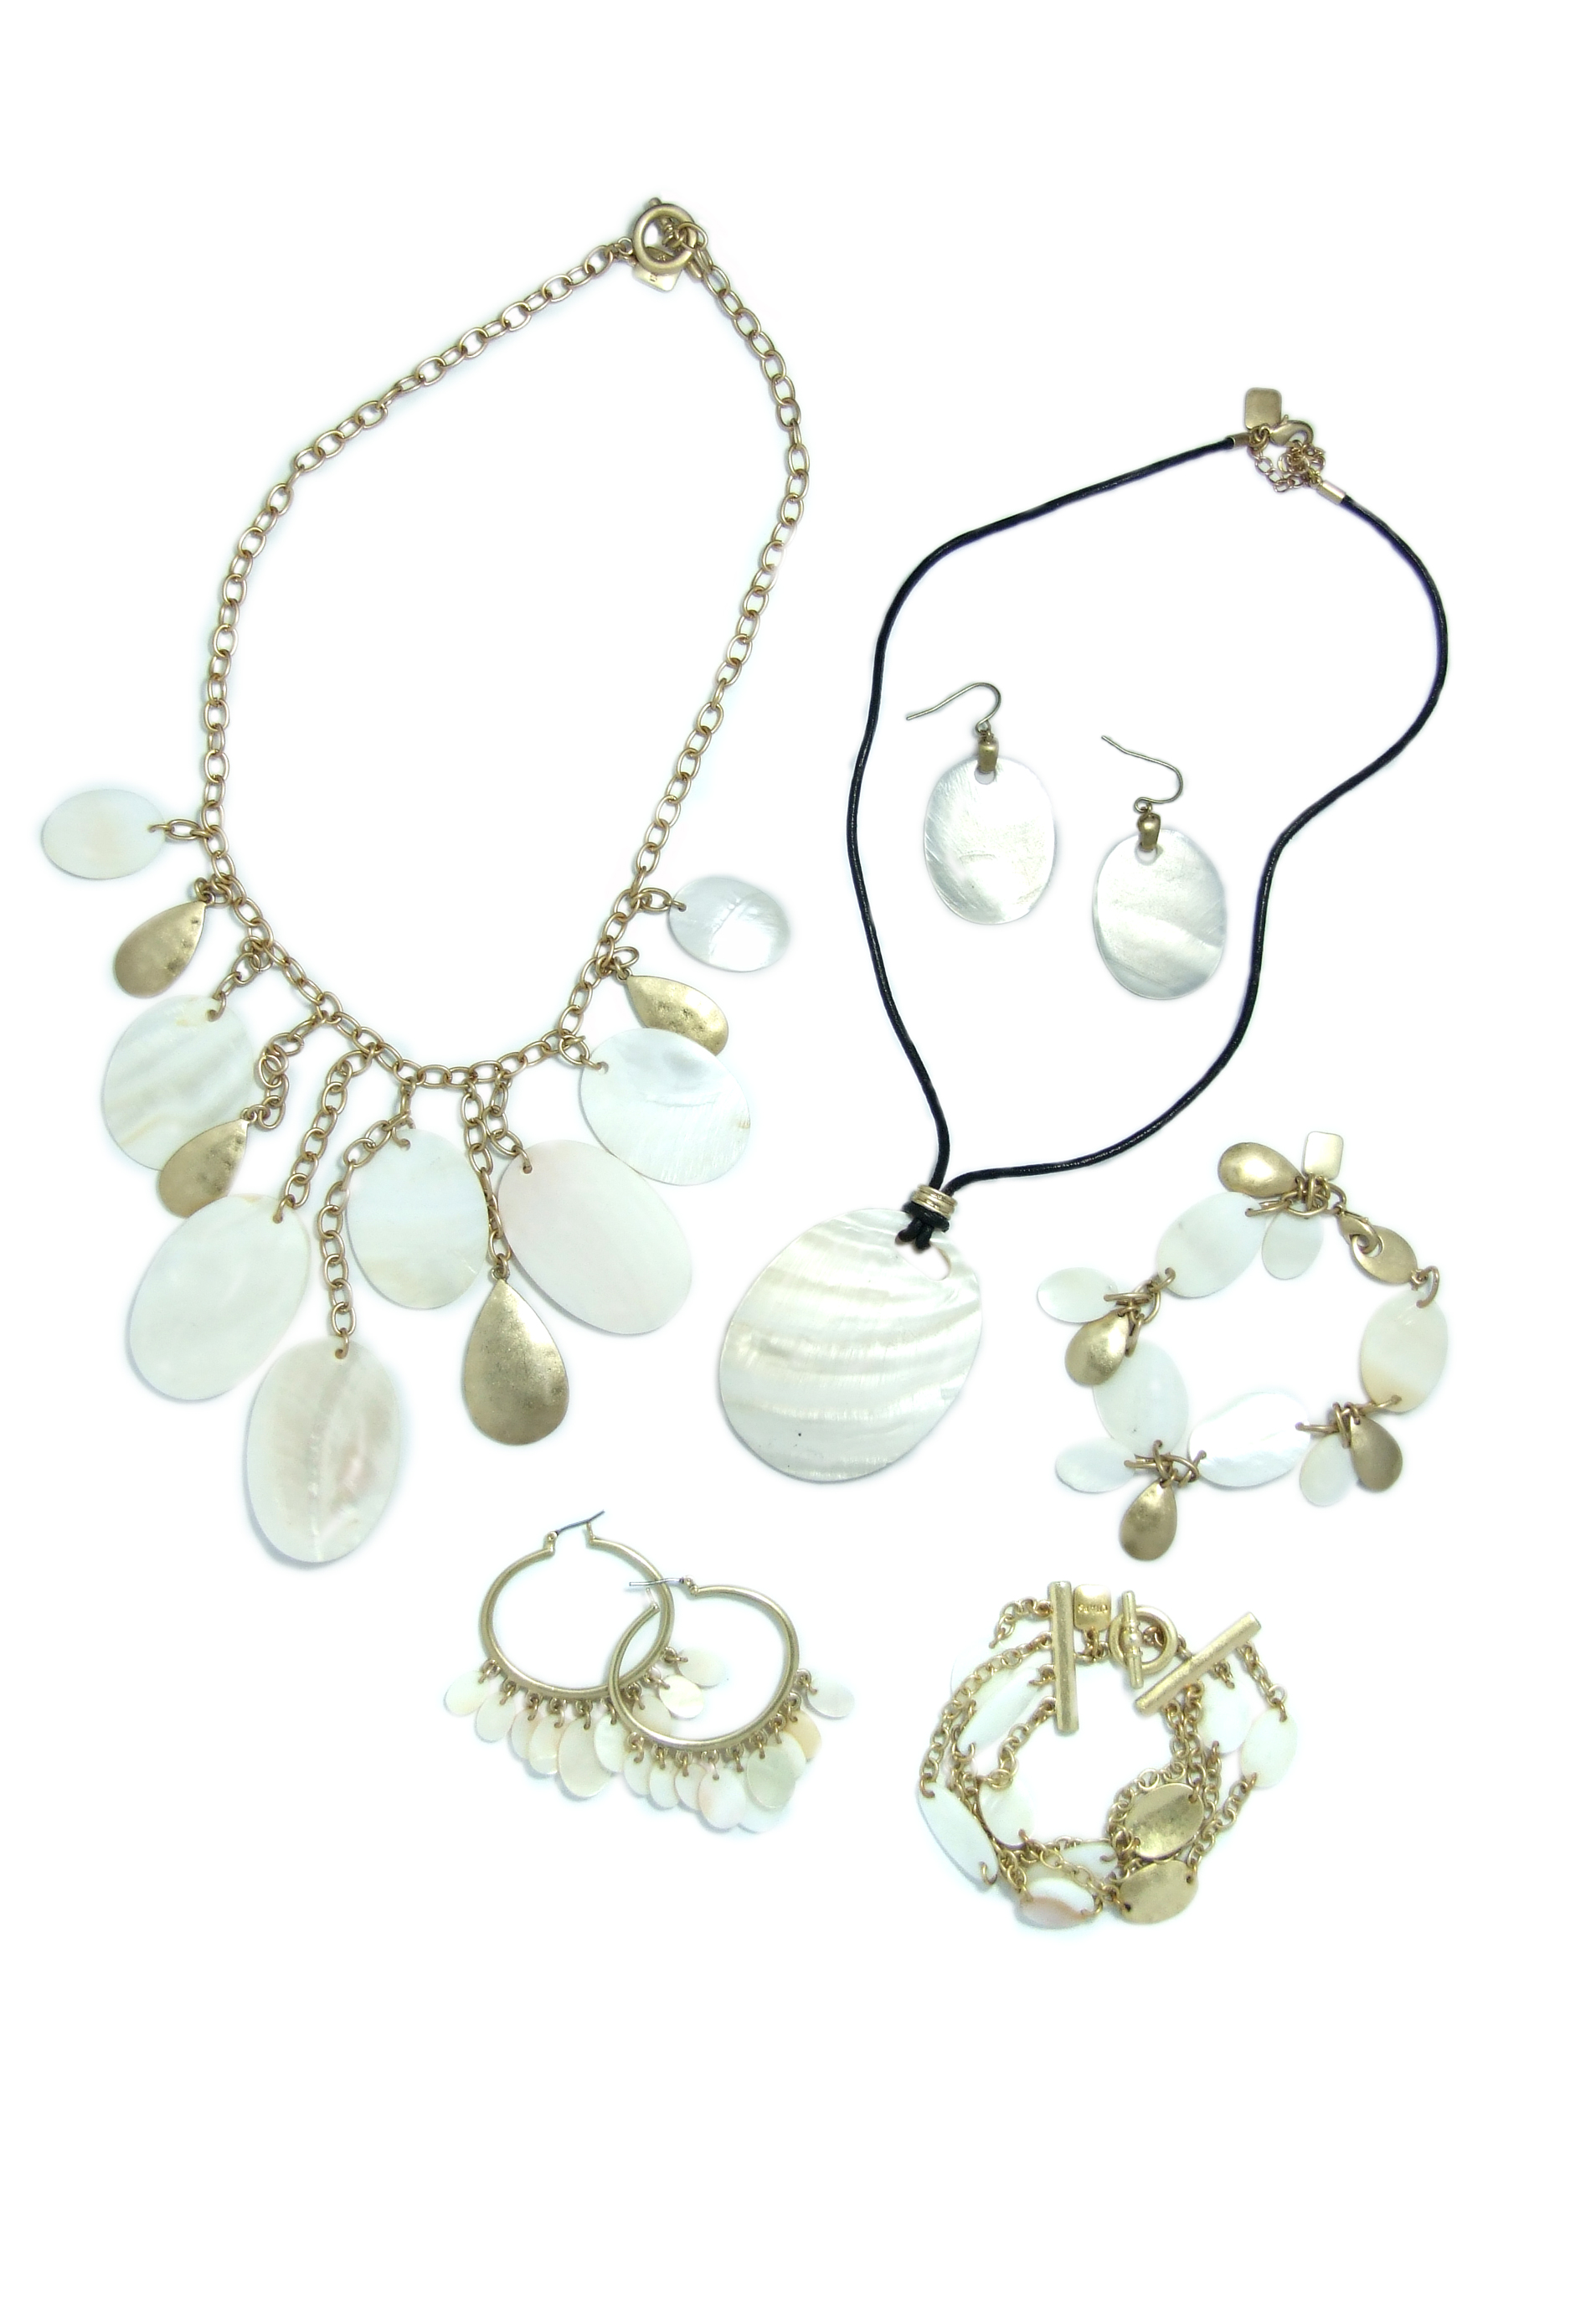 Mother of pearl coin charm necklace, bracelet & earrings